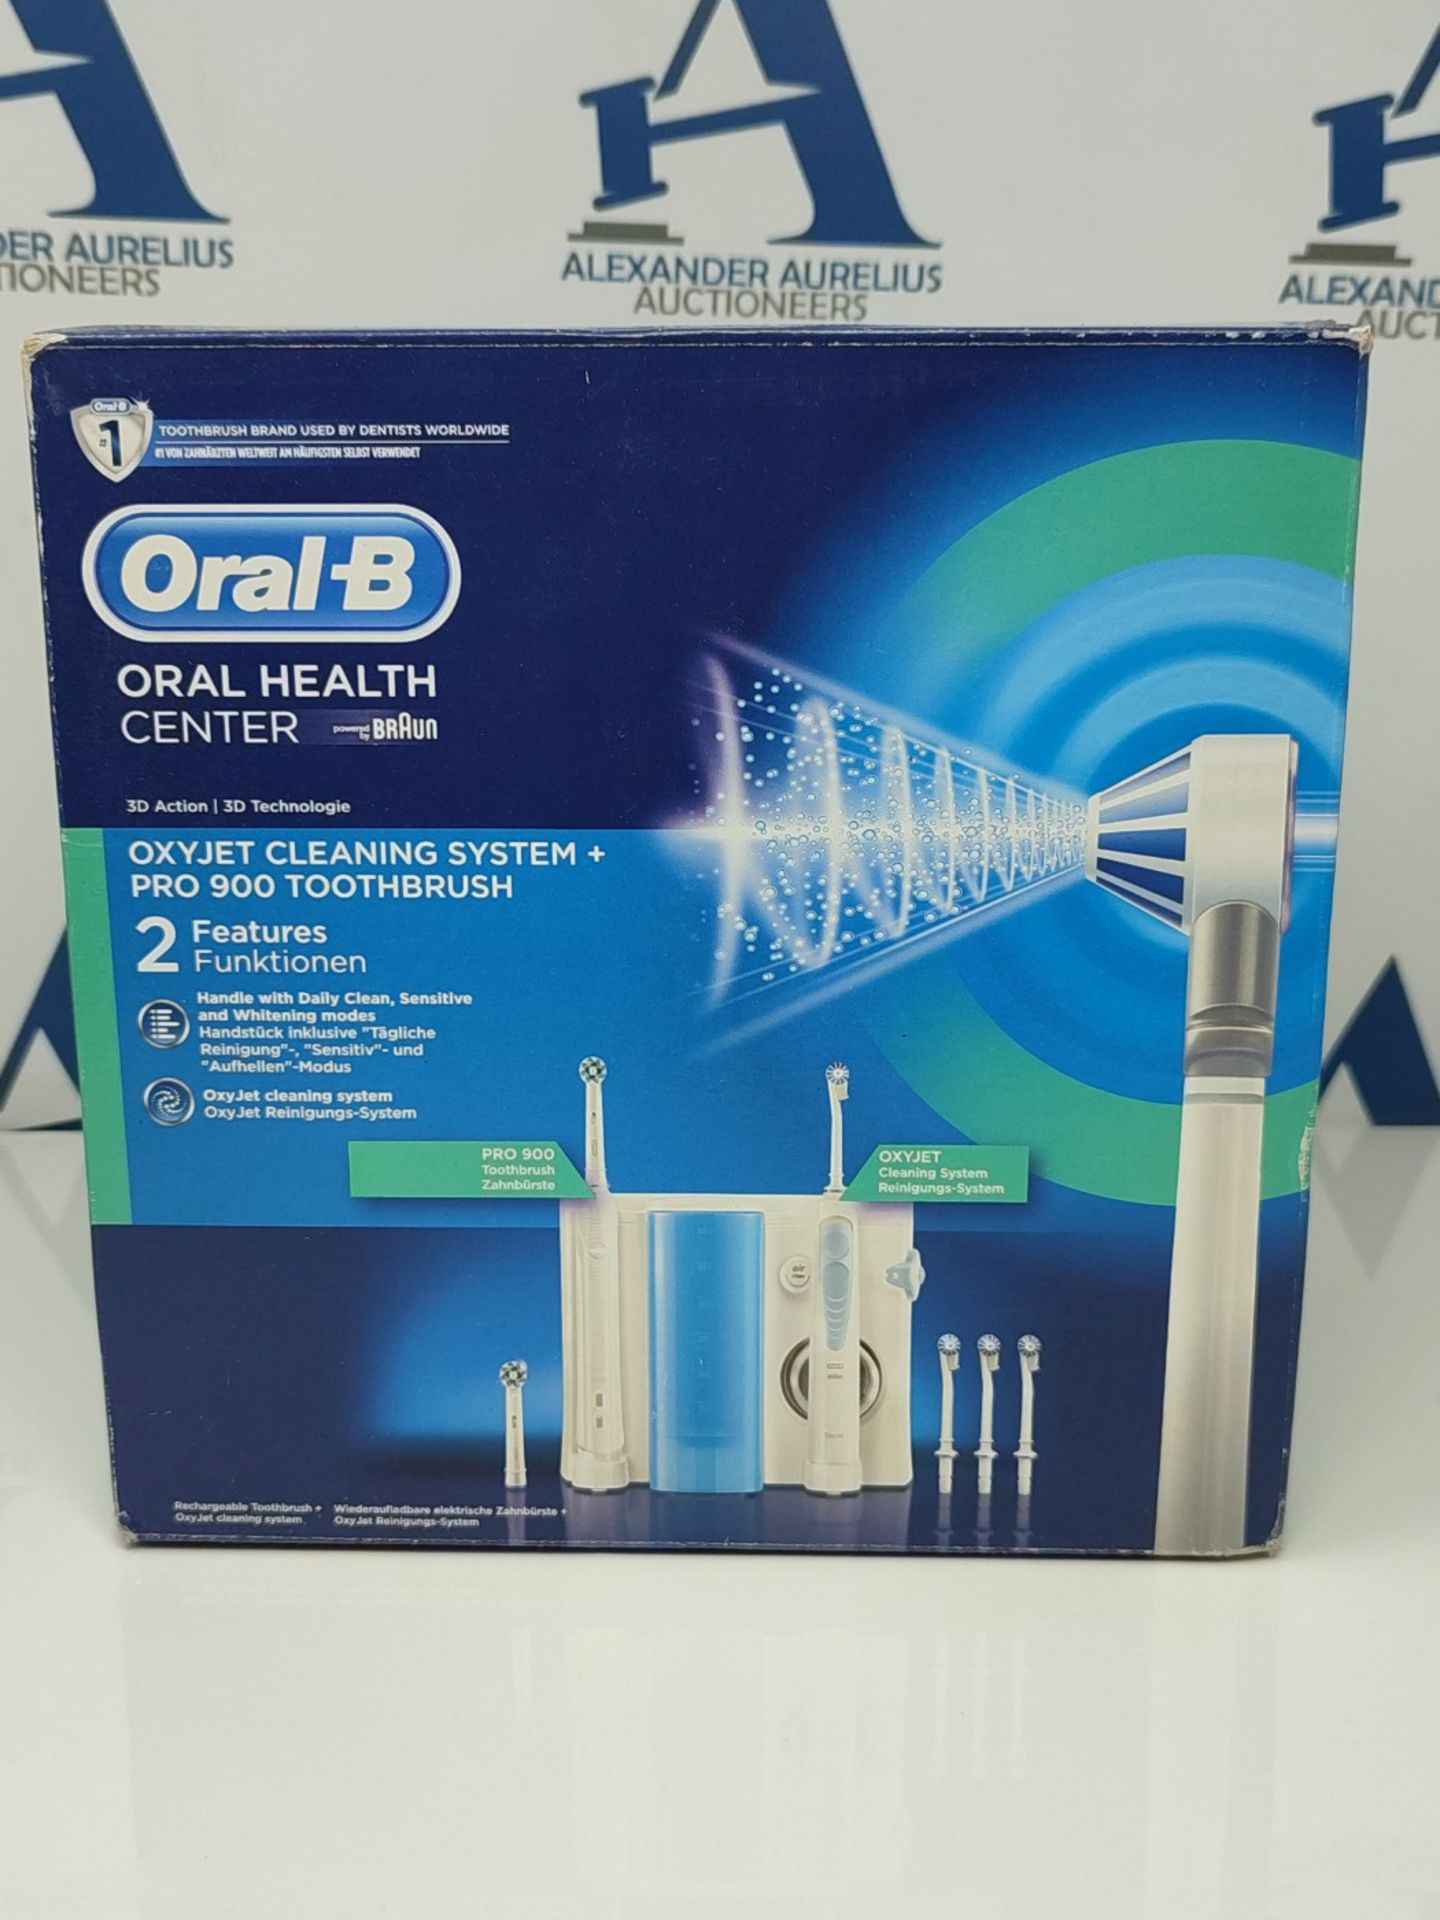 RRP £109.00 Oral-B Oral Health Center Oxyjet Cleaning System + Pro 900 Toothbrush - Image 2 of 3